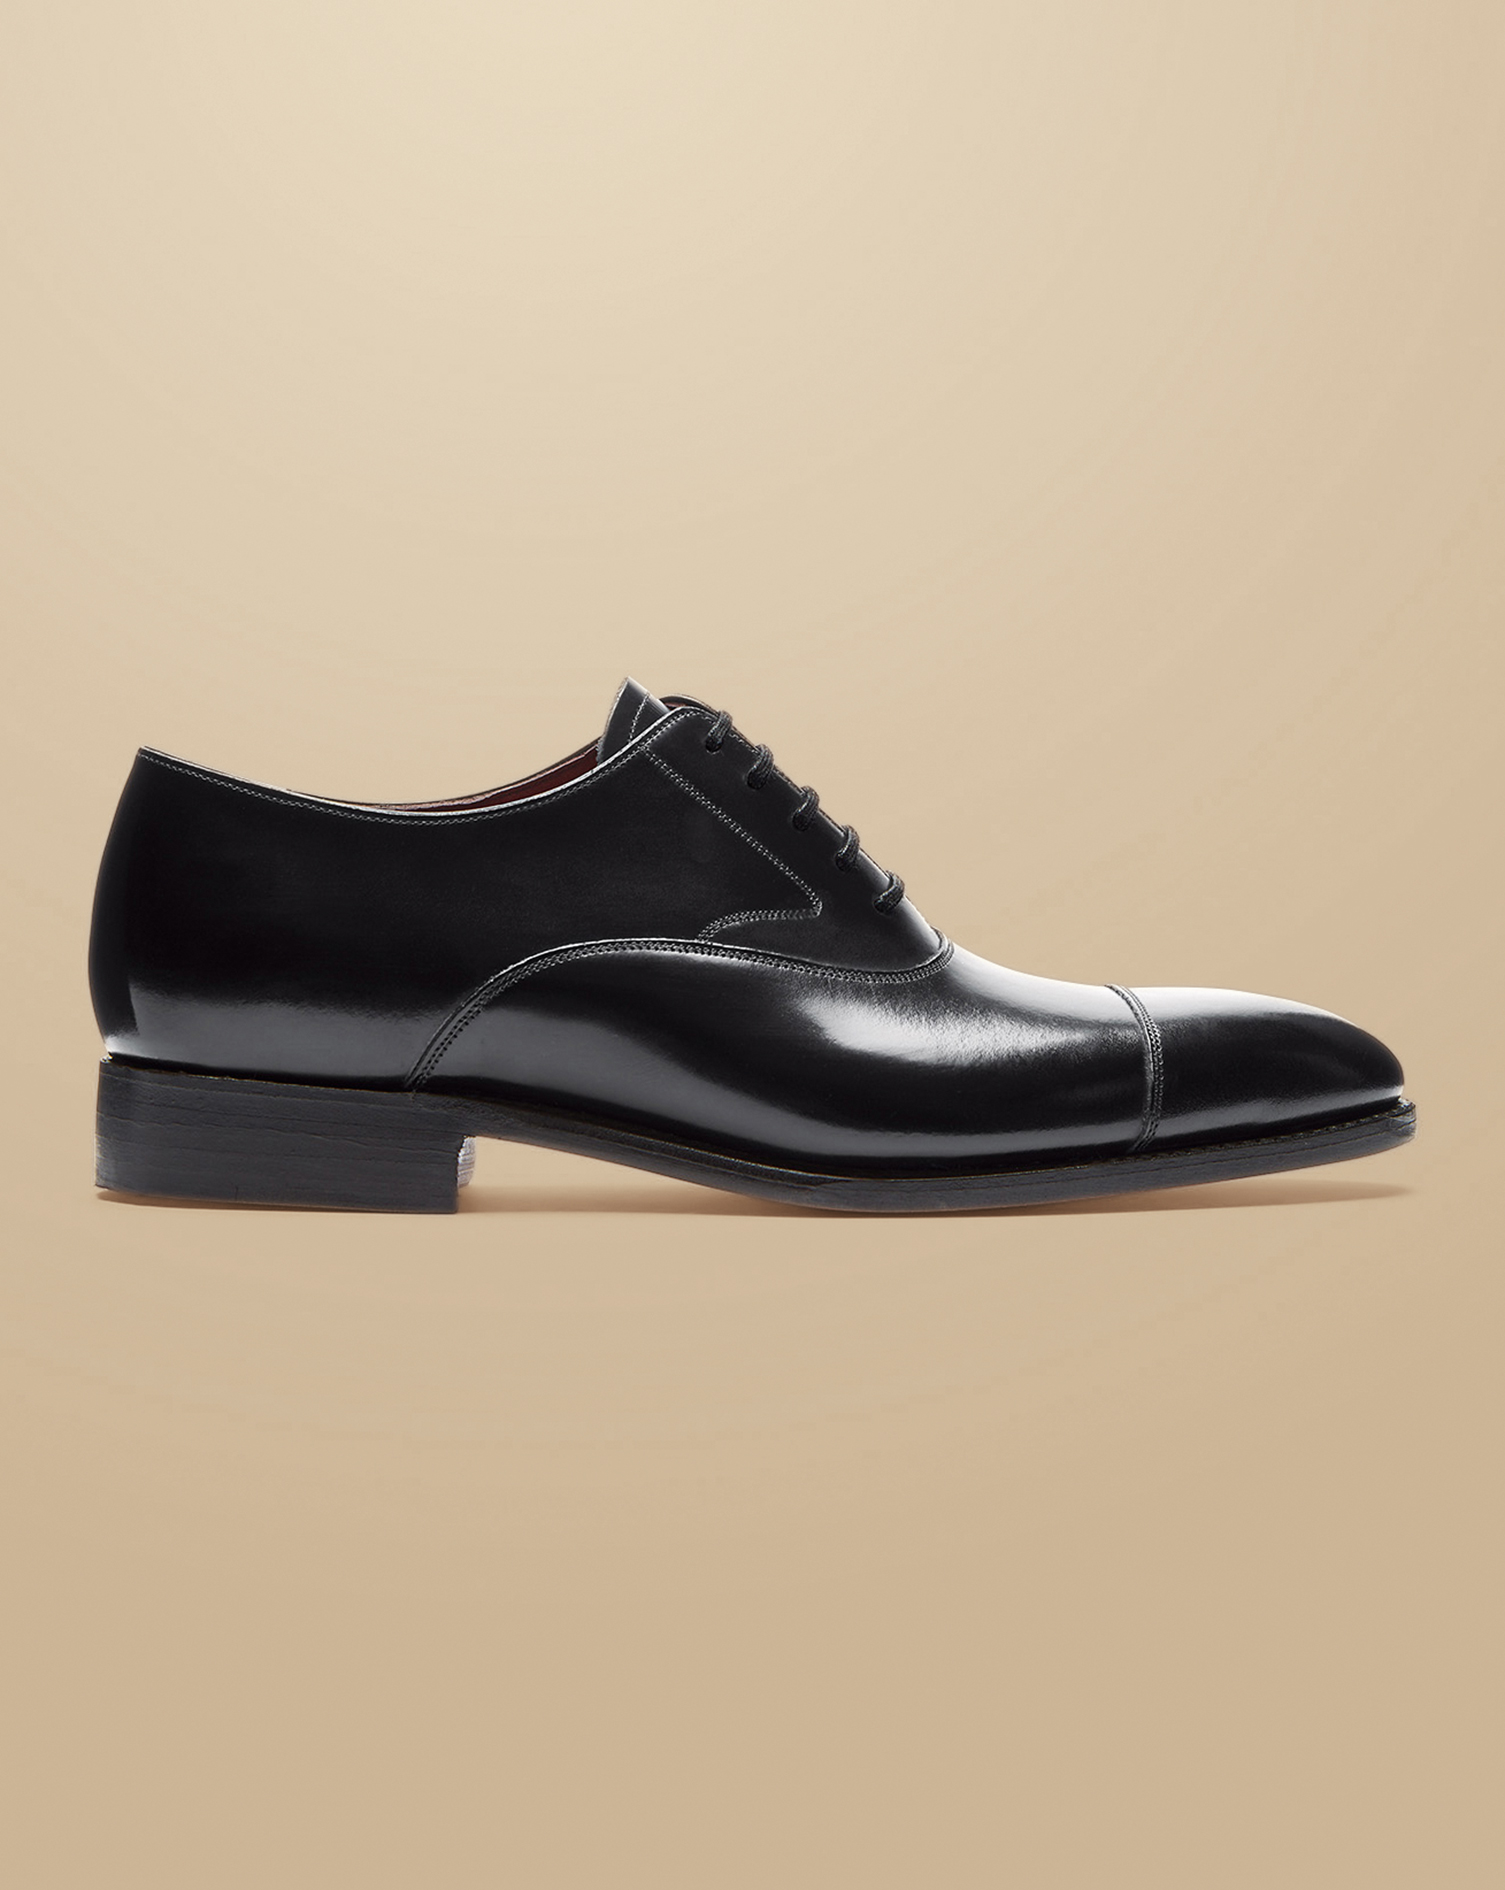 Men's Charles Tyrwhitt Made In England High-Shine Oxford Shoes - Black Size 10.5 Leather
